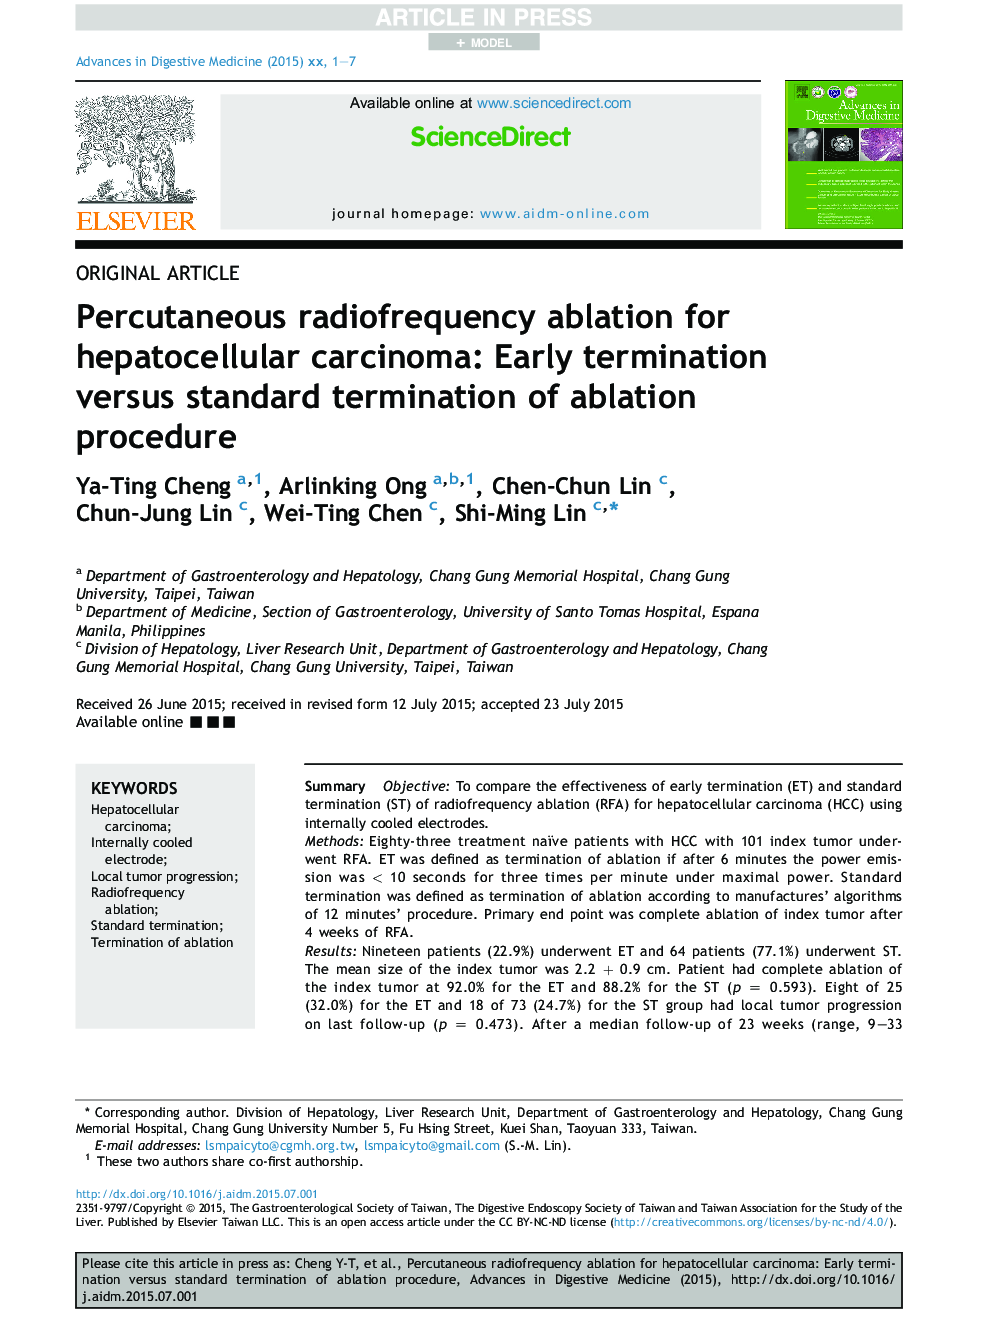 Percutaneous radiofrequency ablation for hepatocellular carcinoma: Early termination versus standard termination of ablation procedure